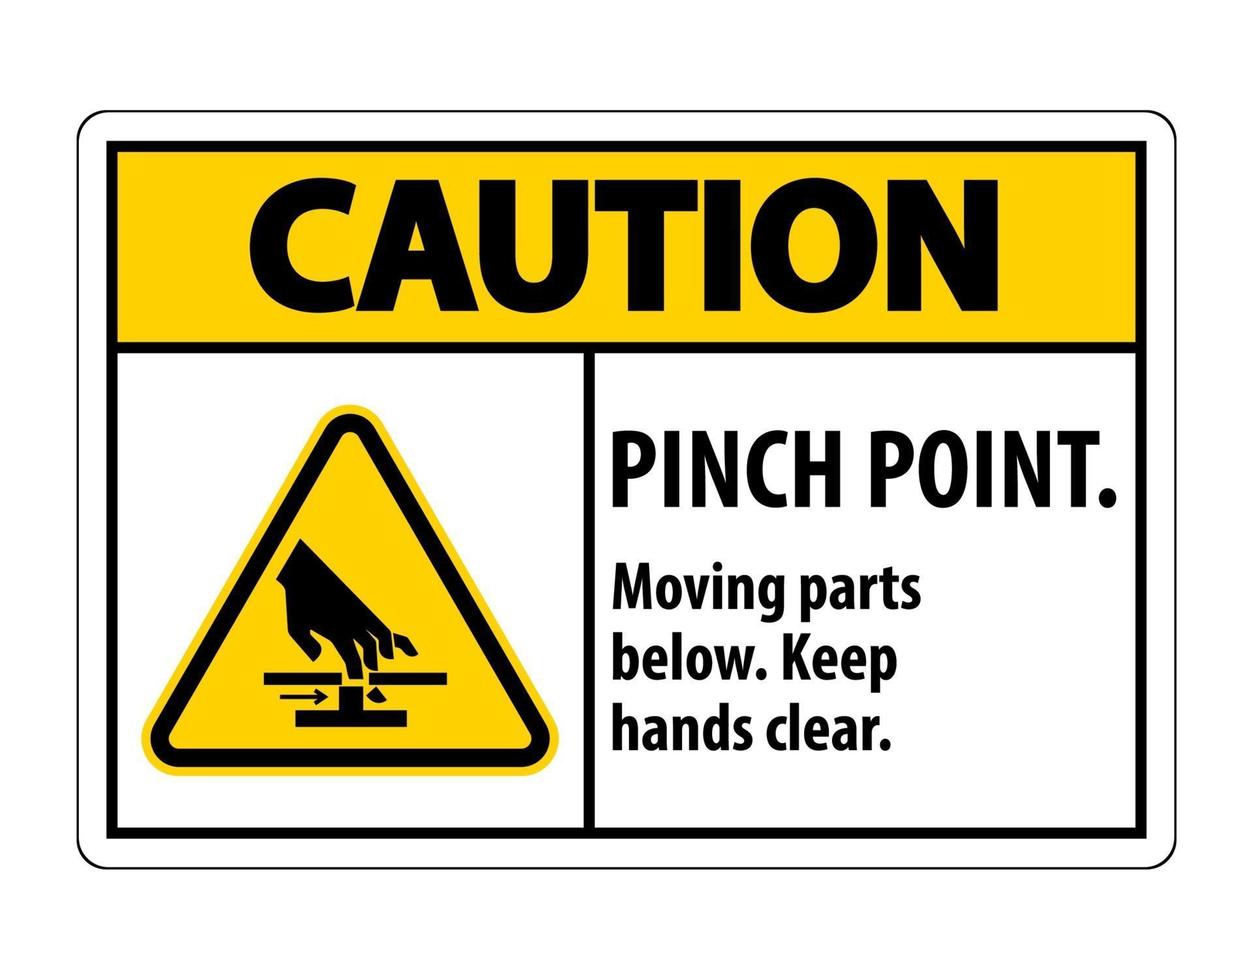 Caution Pinch Point, Moving Parts Below, Keep Hands Clear Symbol Sign Isolate on White Background,Vector Illustration EPS.10 vector